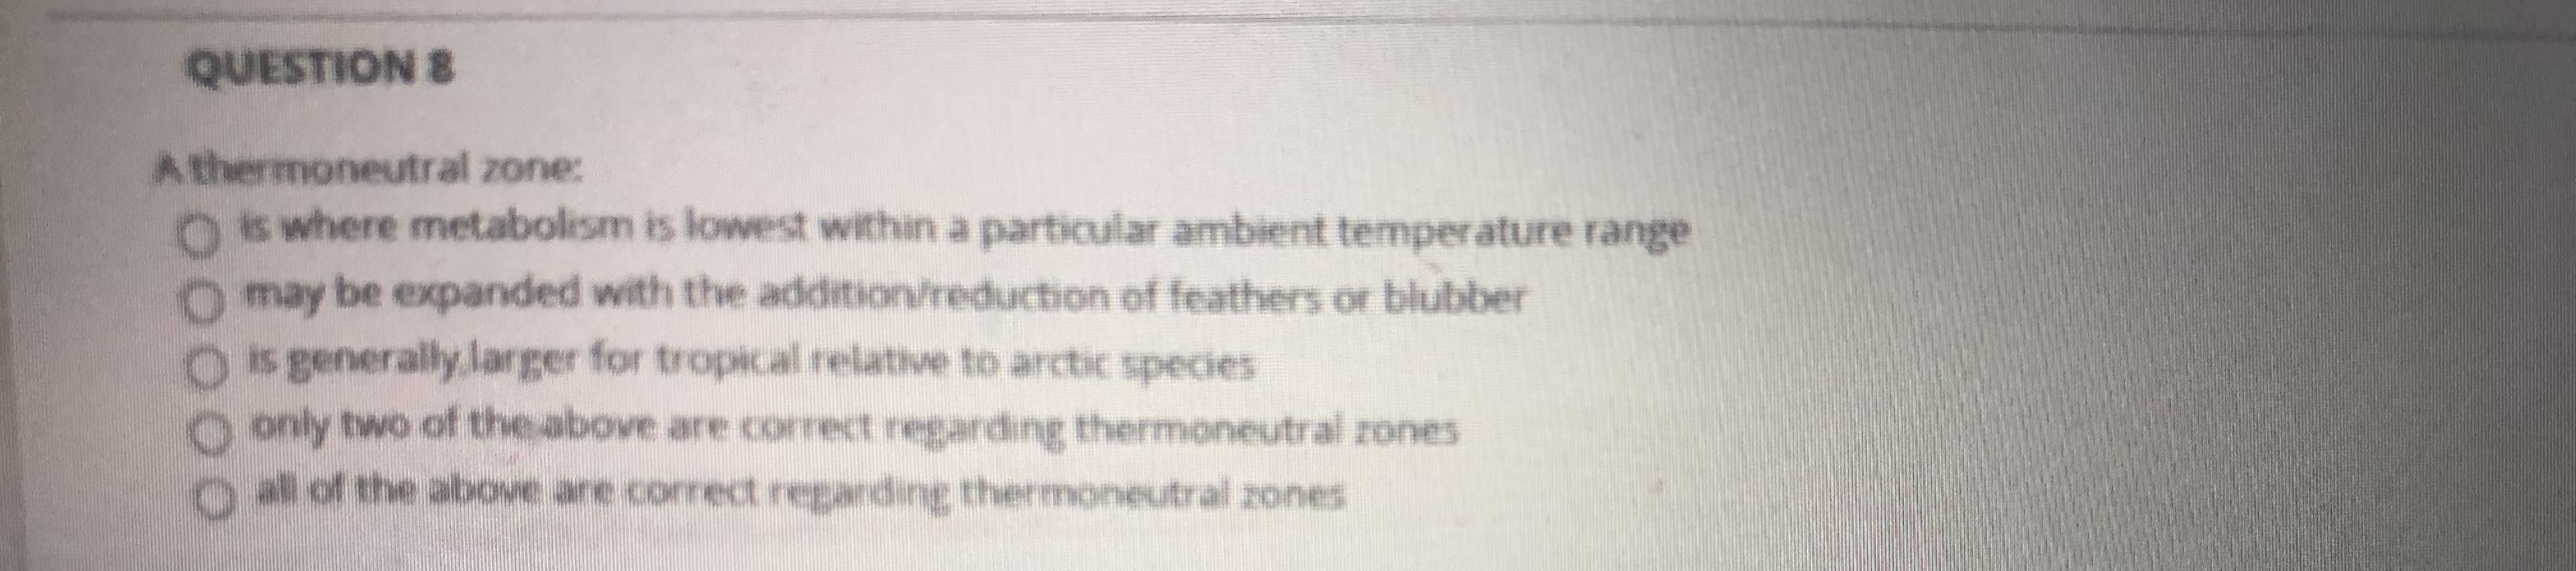 A thermoneutral zone:
Os where metabolism is lowest within a particular ambient temperature range
may be expanded with the addition/reduction of feathers or blubber
is generally larger for tropical relative to arctic species
0 only two of the above are correct reganding thermoneutral rones
Olof the above ane correct reganding thermoneutral zones
